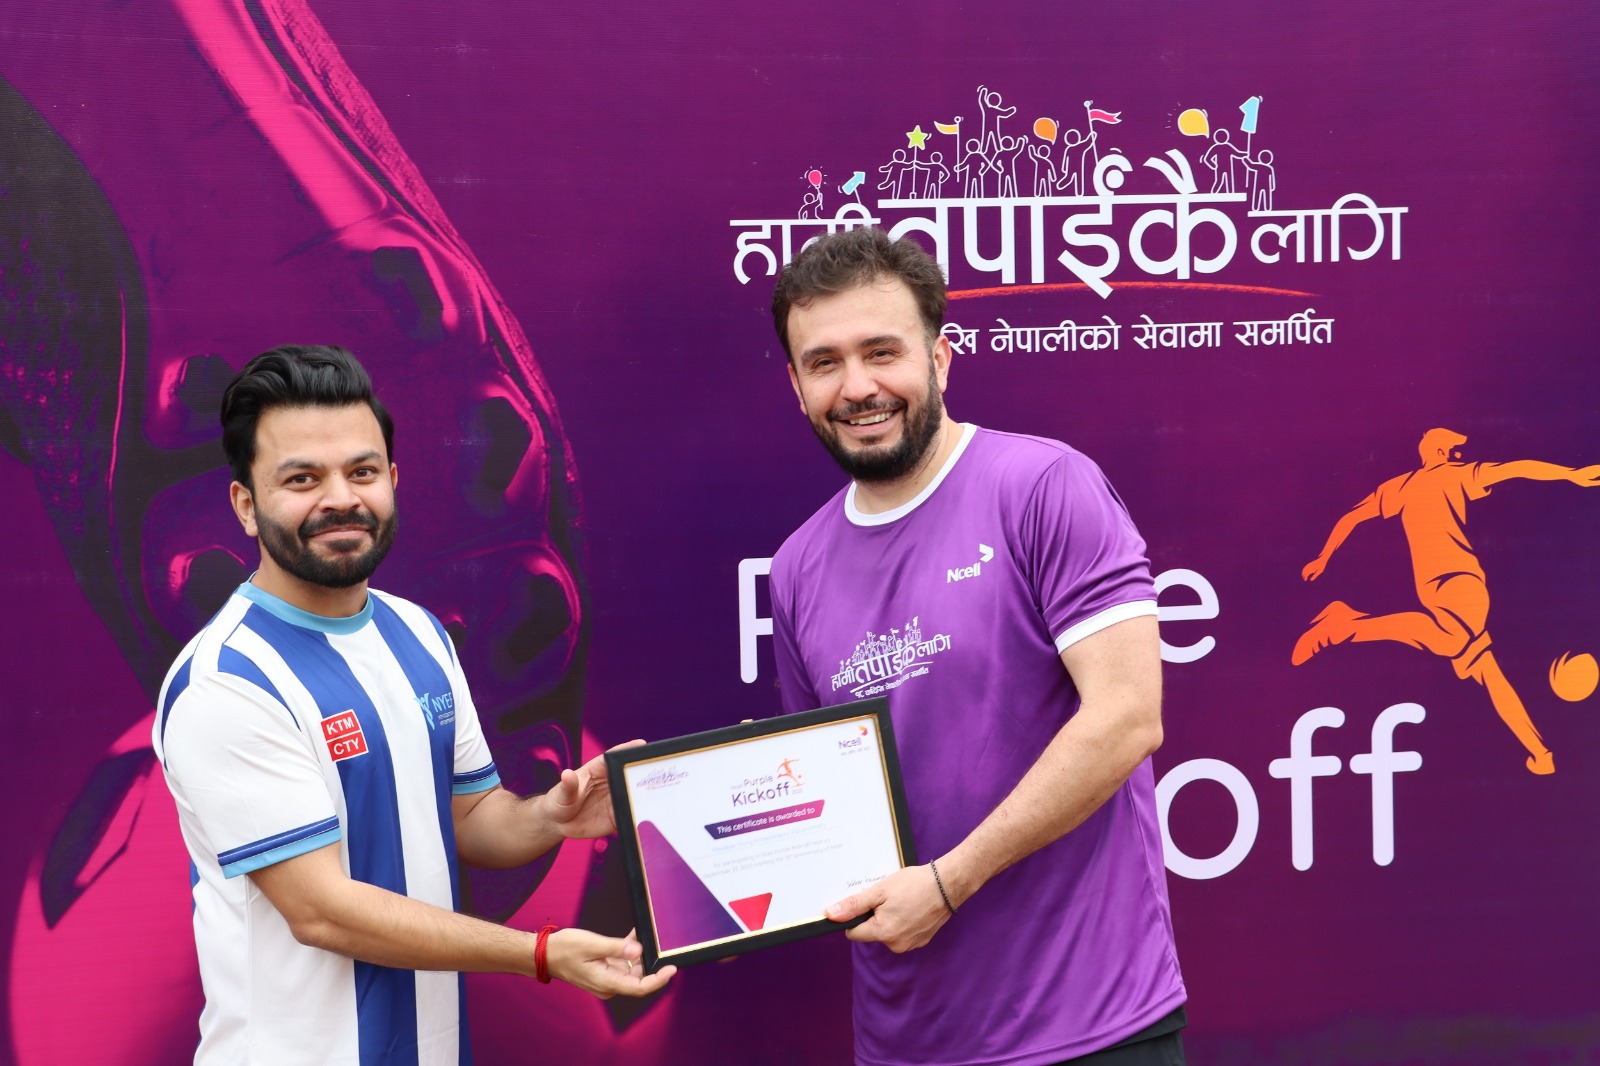 Ncell hosts ‘Purple Kickoff’in celebration marking 18th anniversary